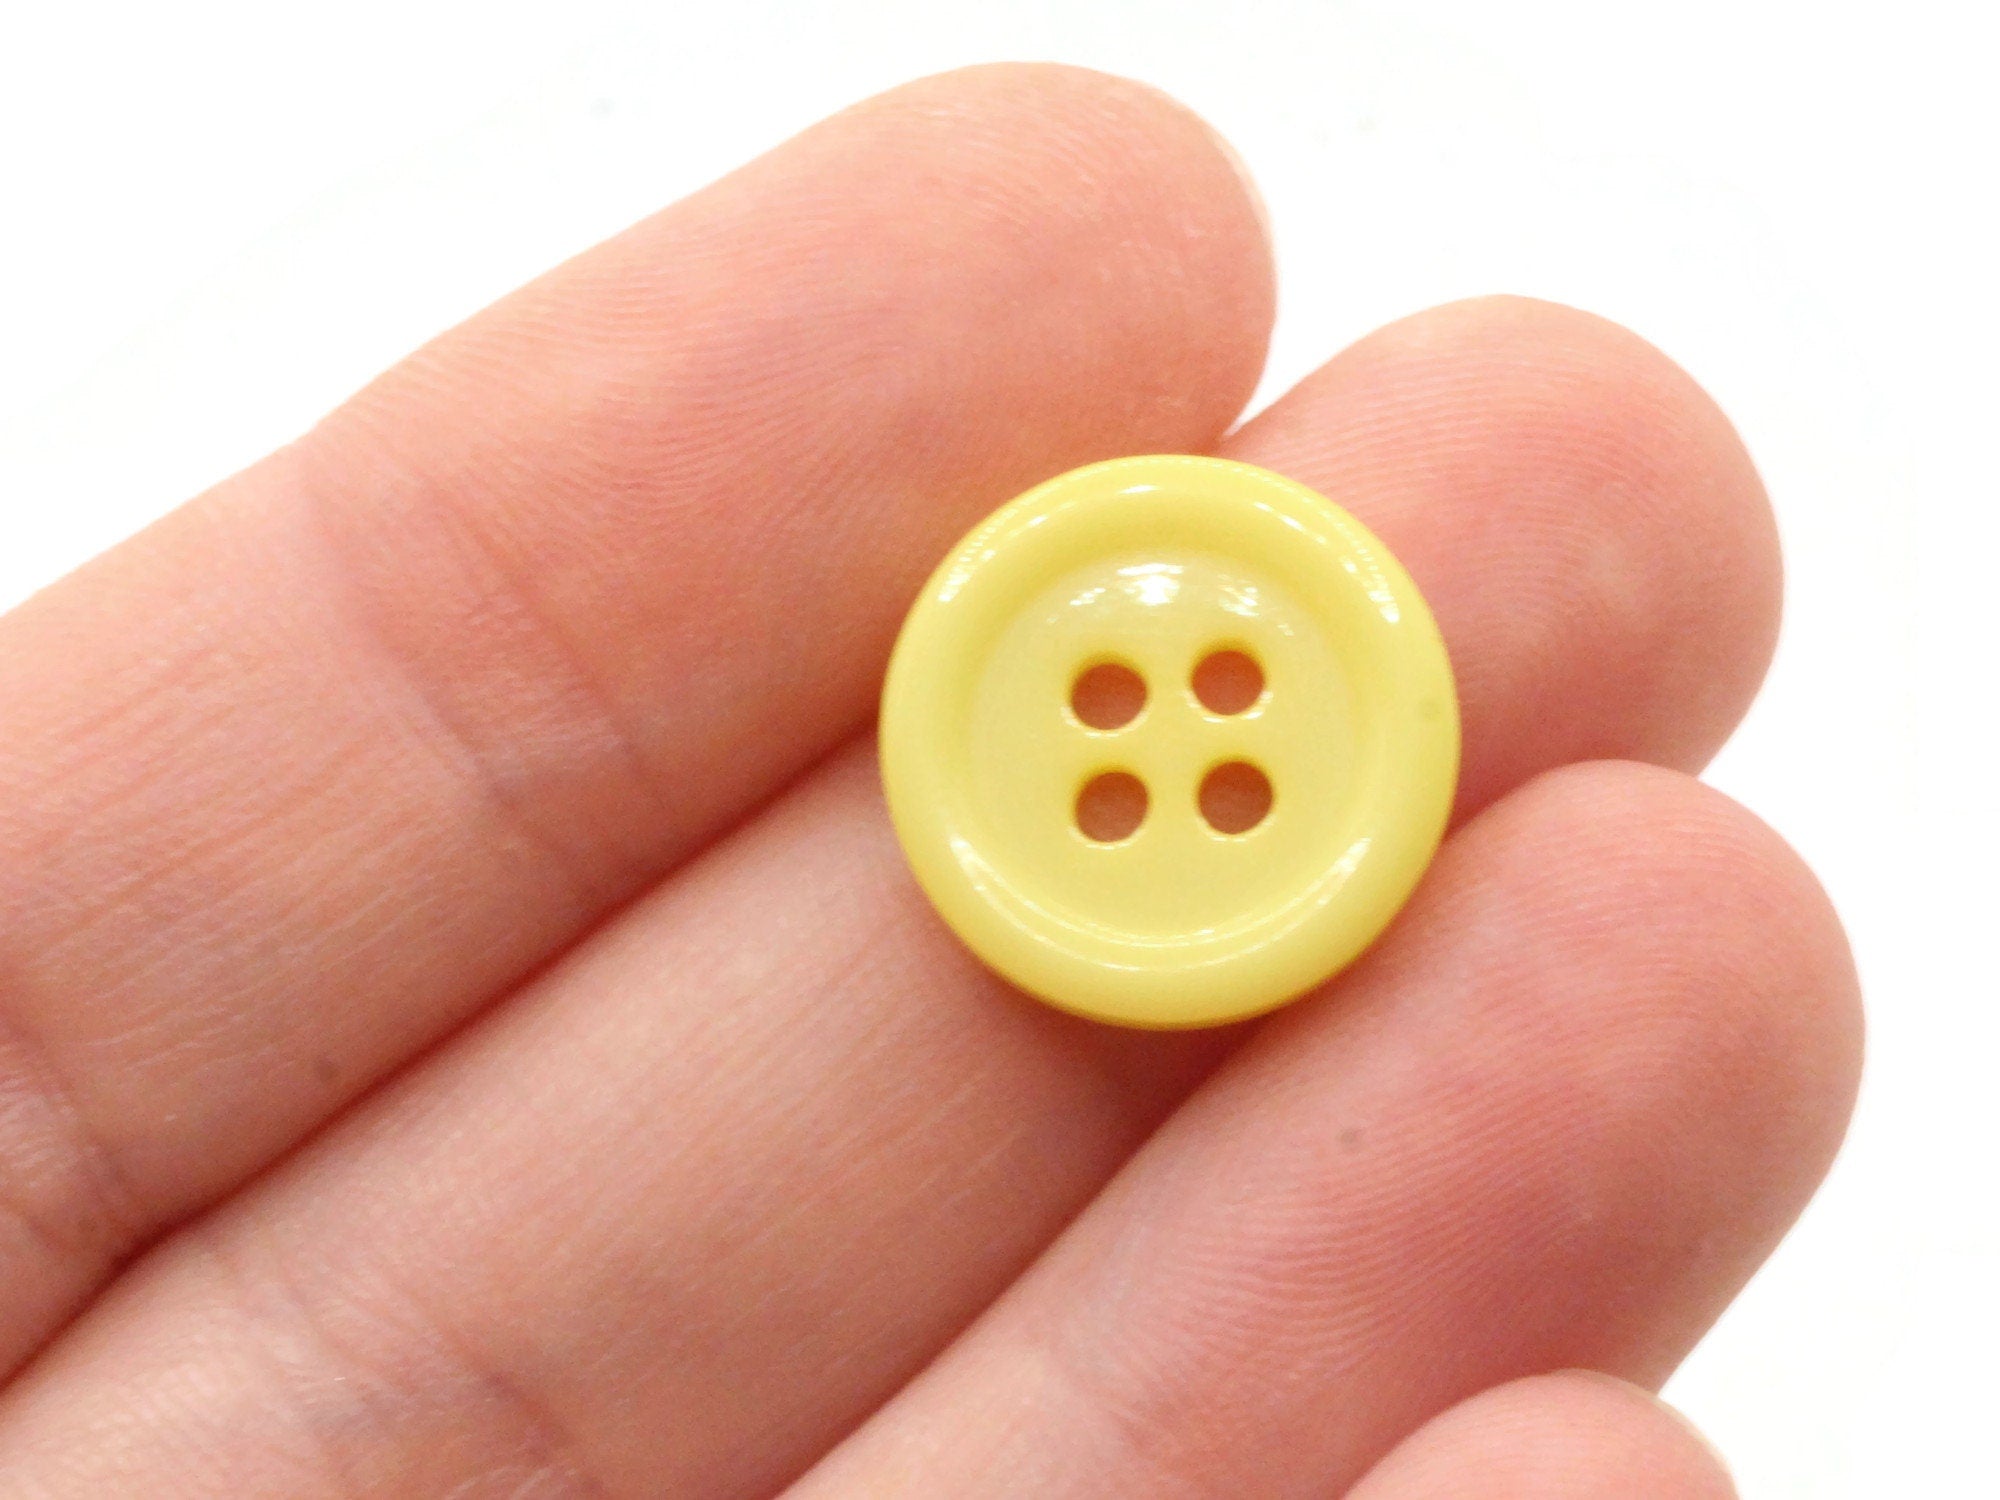 Football Wooden Button 15mm - Stranded by the Sea